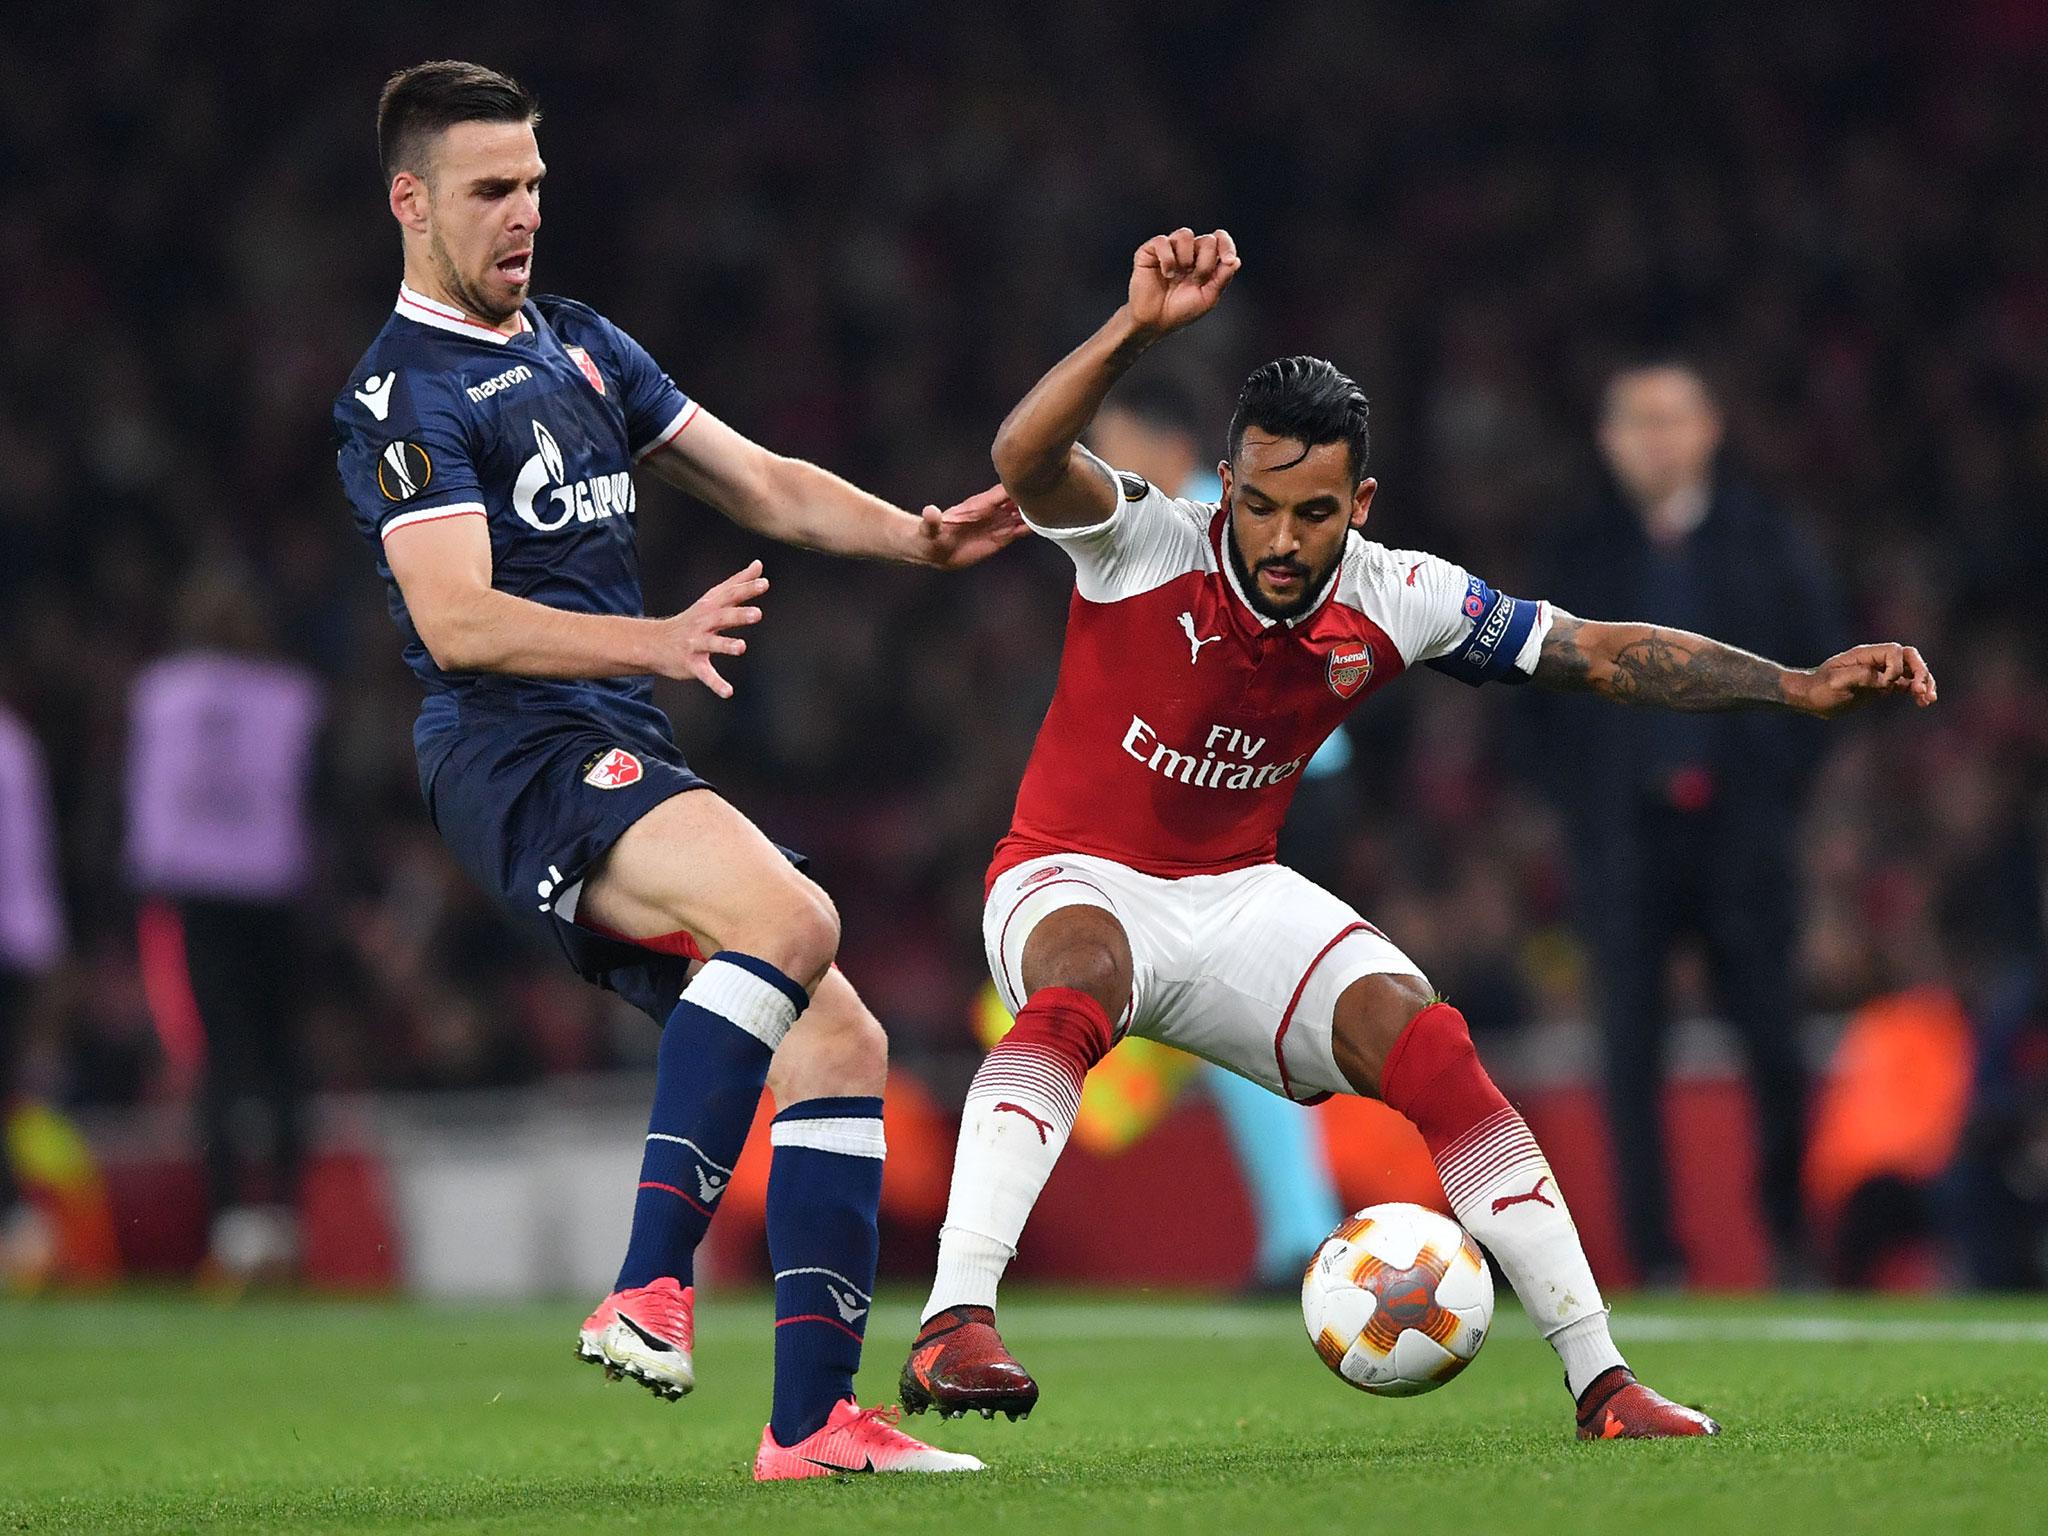 Theo Walcott and his team got the job done - not without their nervy moments though